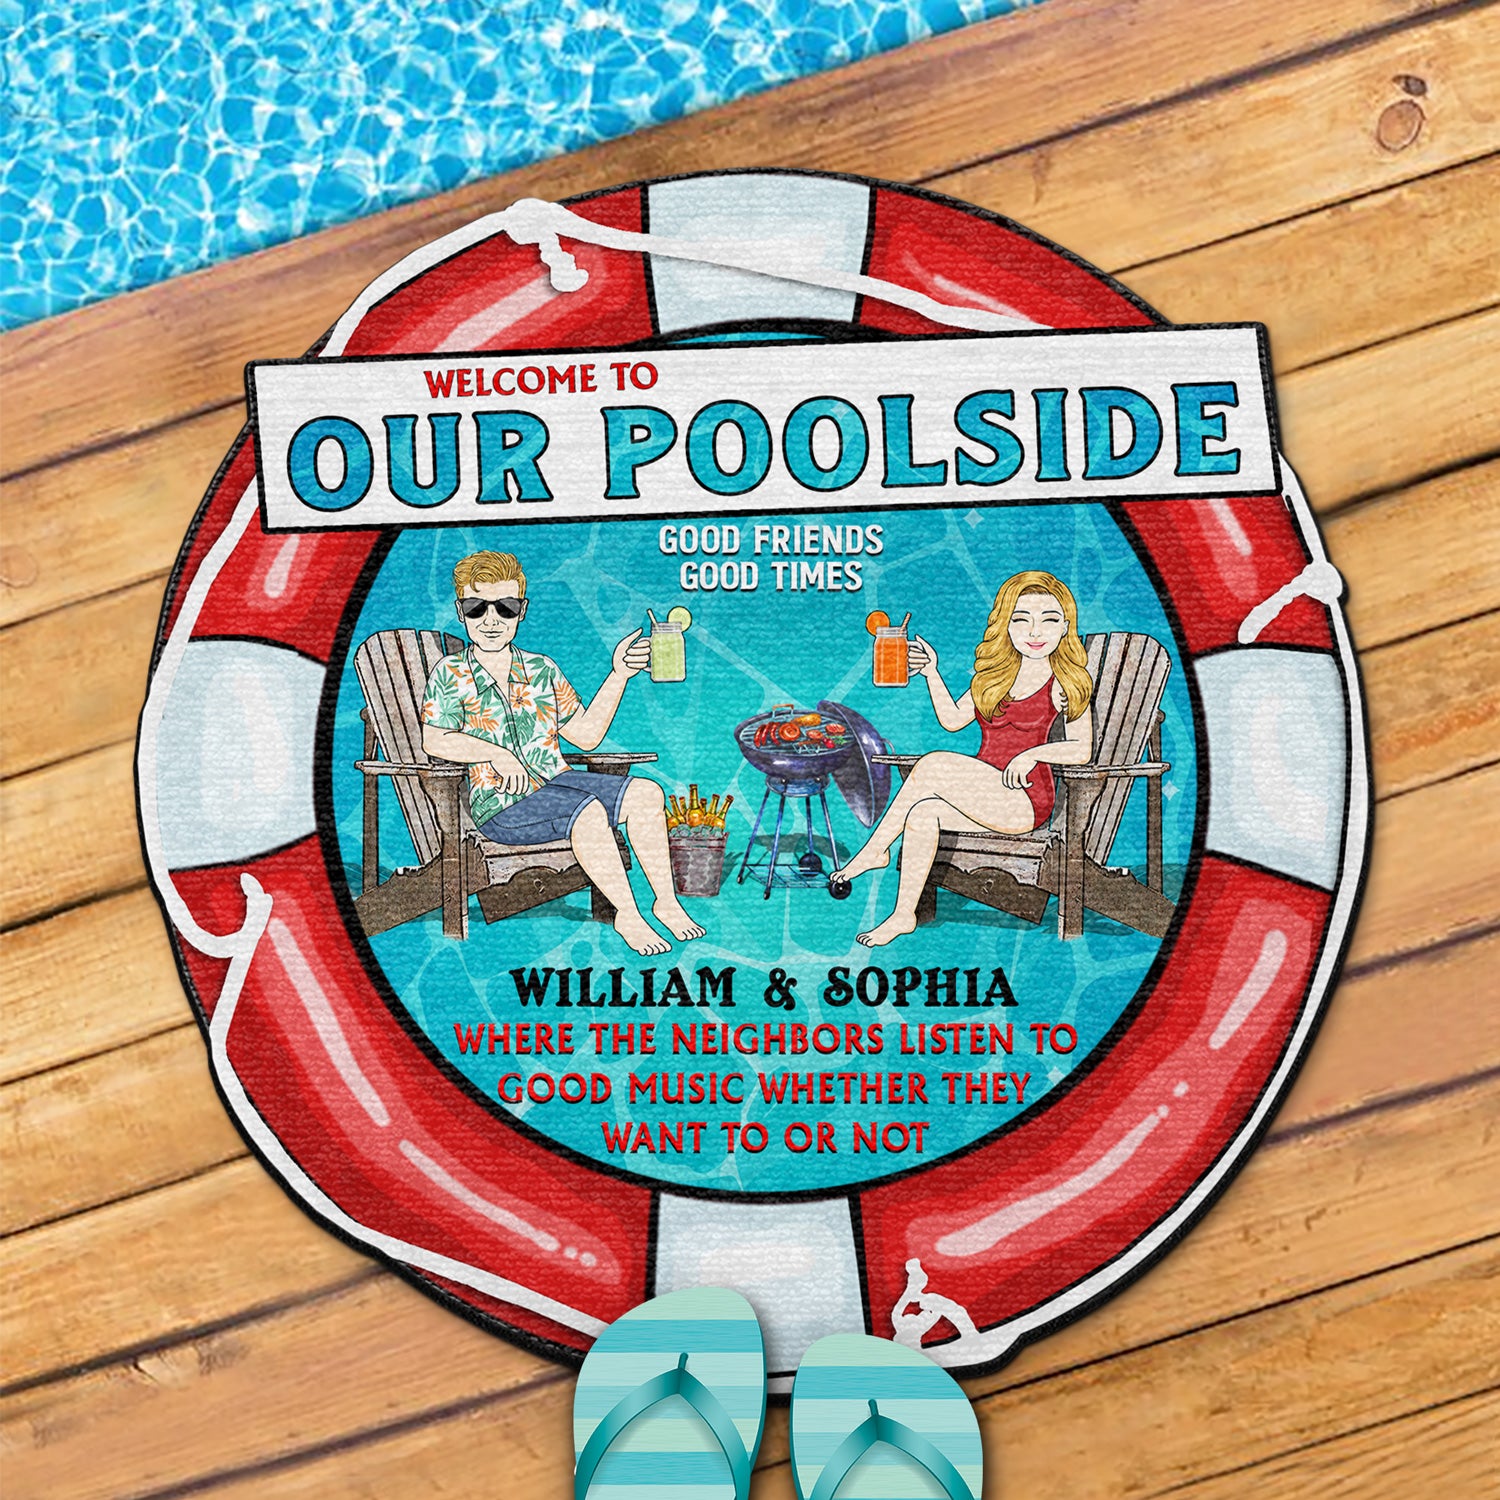 Poolside Grilling Listen To The Good Music - Outdoor Decor For Couples, Swimming Pool - Personalized Custom Shaped Doormat